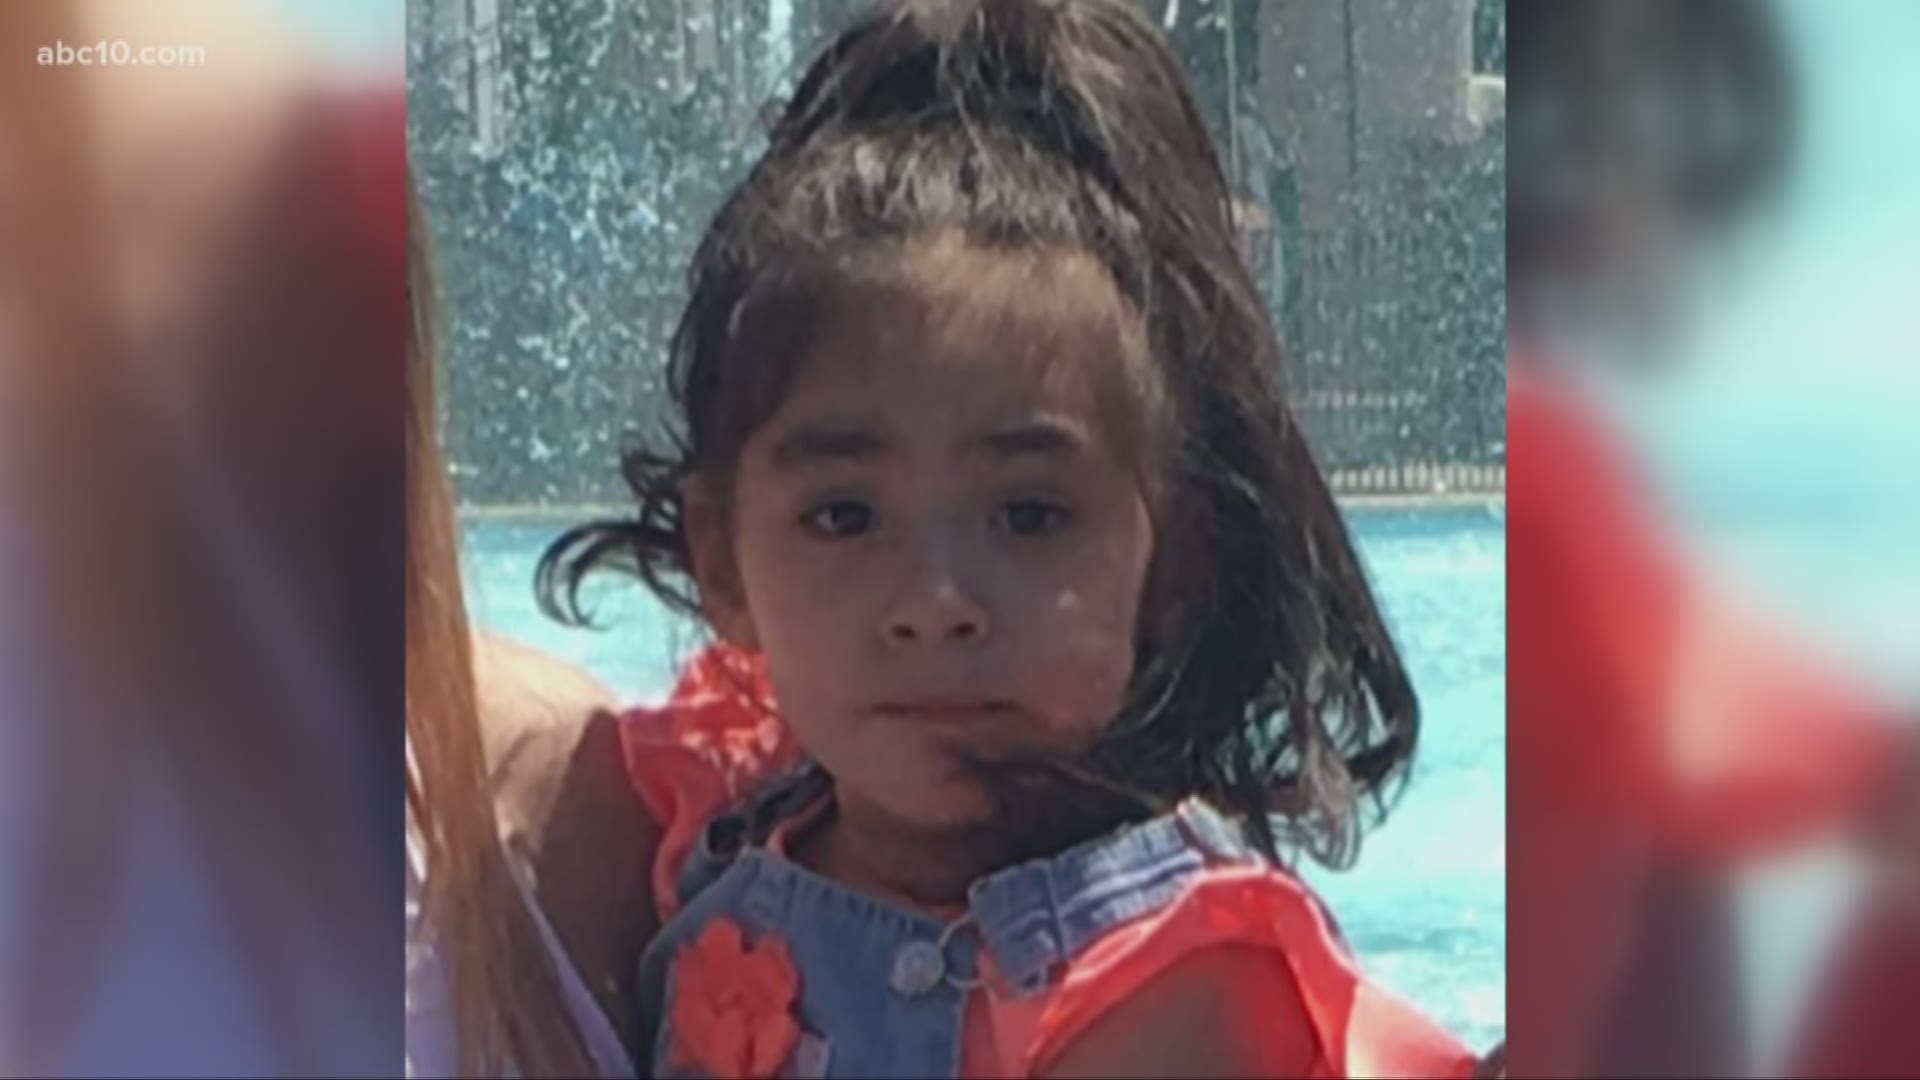 At midnight on Wednesday, officials began the process of reducing the flow of water from New Melones Dam, according to the Stanislaus County Sheriff's Office. The effort was made to help in the search for 5-year-old Matilda Ortiz, who was swept away in the river over the weekend. Sadly, Wednesday afternoon, volunteers found the little girl's body.